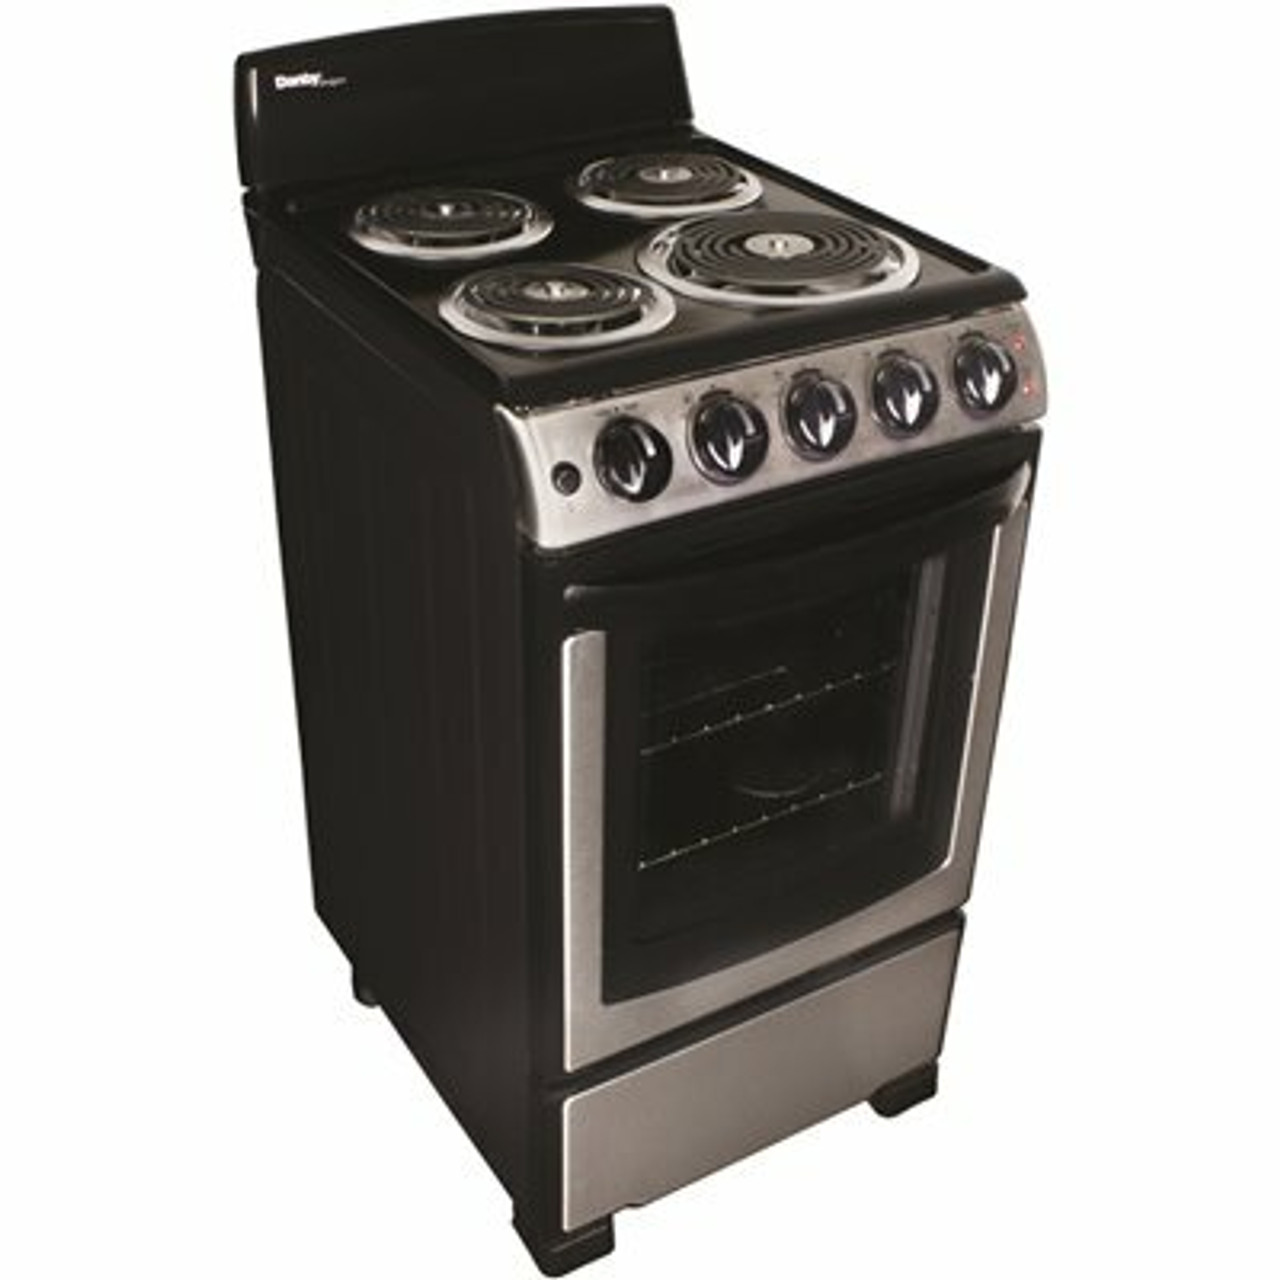 Danby 20 In. 2.3 Cu.Ft. Single Oven Electric Range With Manual Clean Oven In Black And Stainless